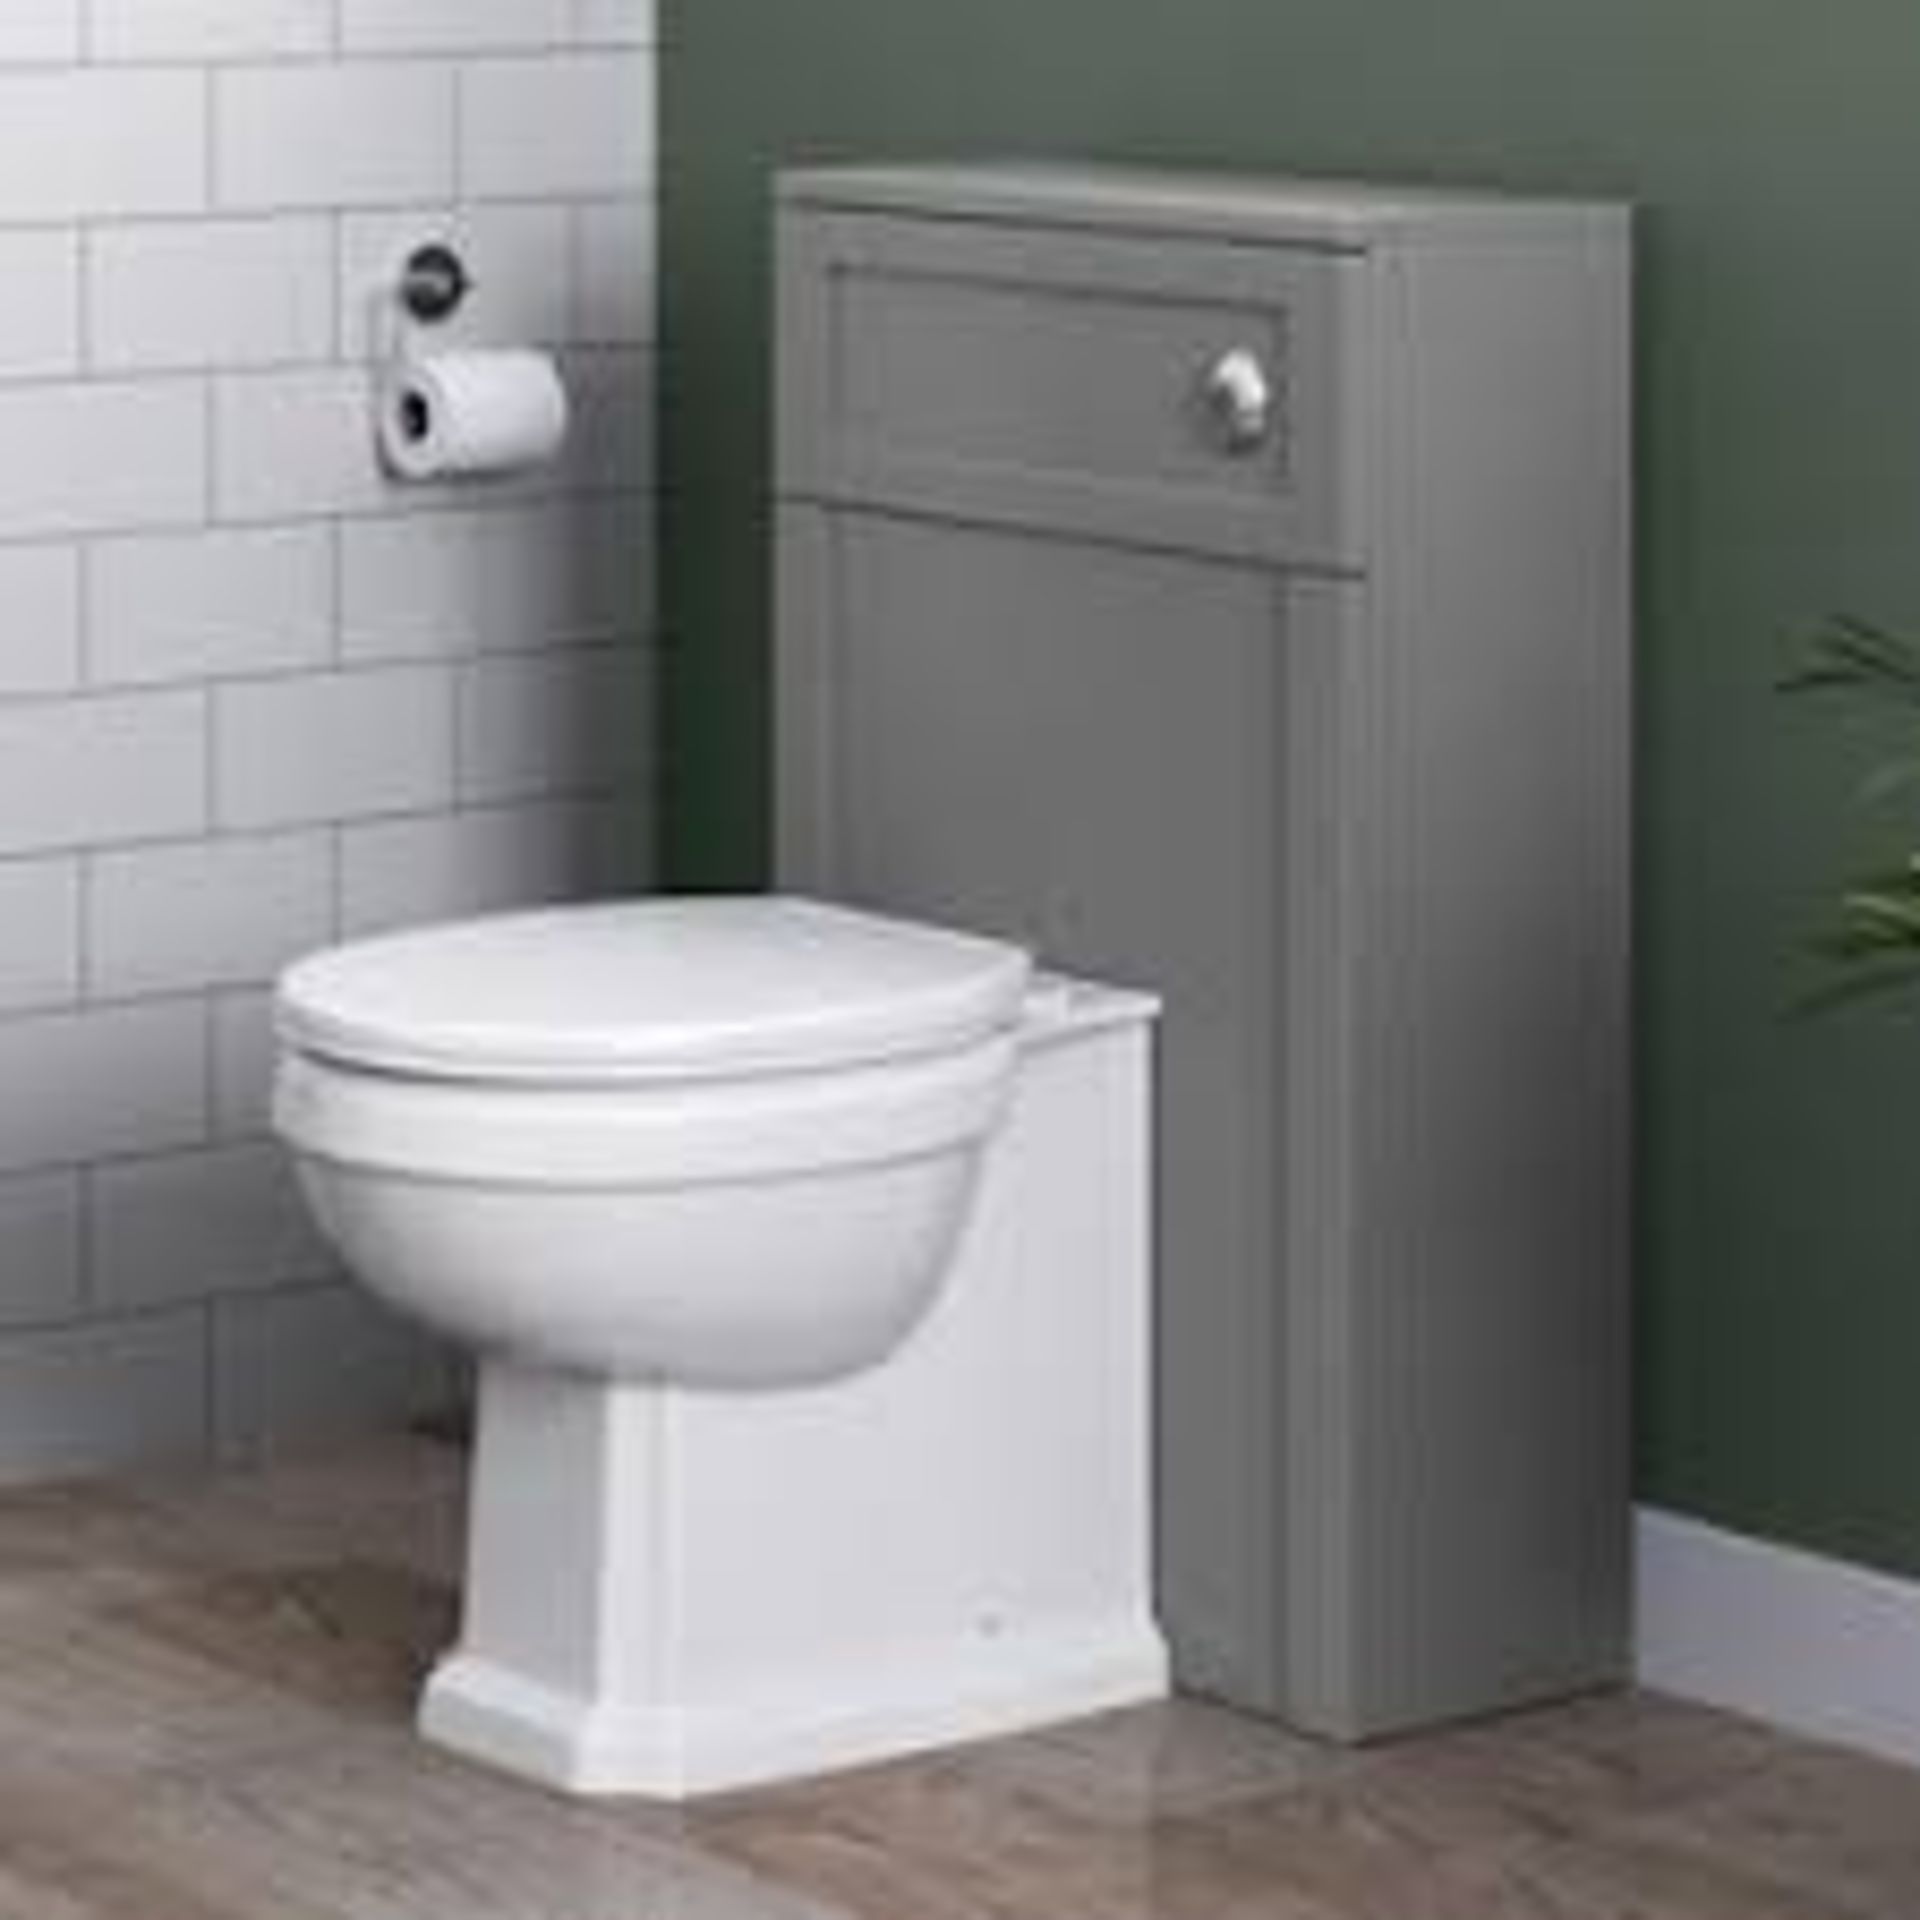 Pallet To Contain 8 x New Cambridge Traditional Back To Wall Toilet - White Seat. 629BWP. Tradi...